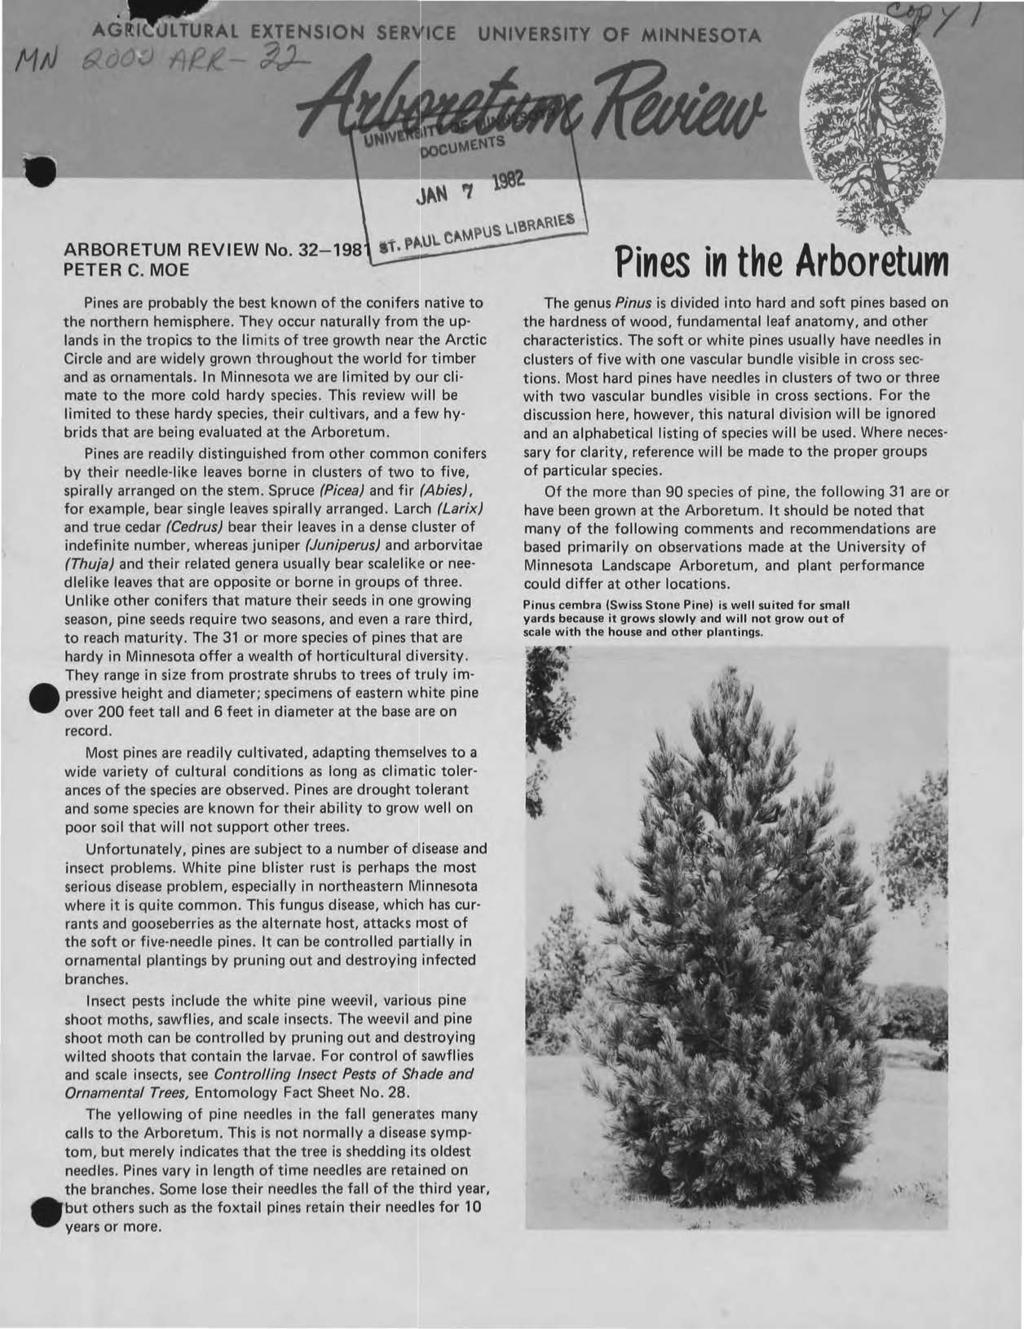 MtJ UNIVERSITY OF MINNESOTA A ARBORETUM REVIEW No. 32-198 PETER C. MOE Pines are probably the best known of the conifers native to the northern hemisphere.